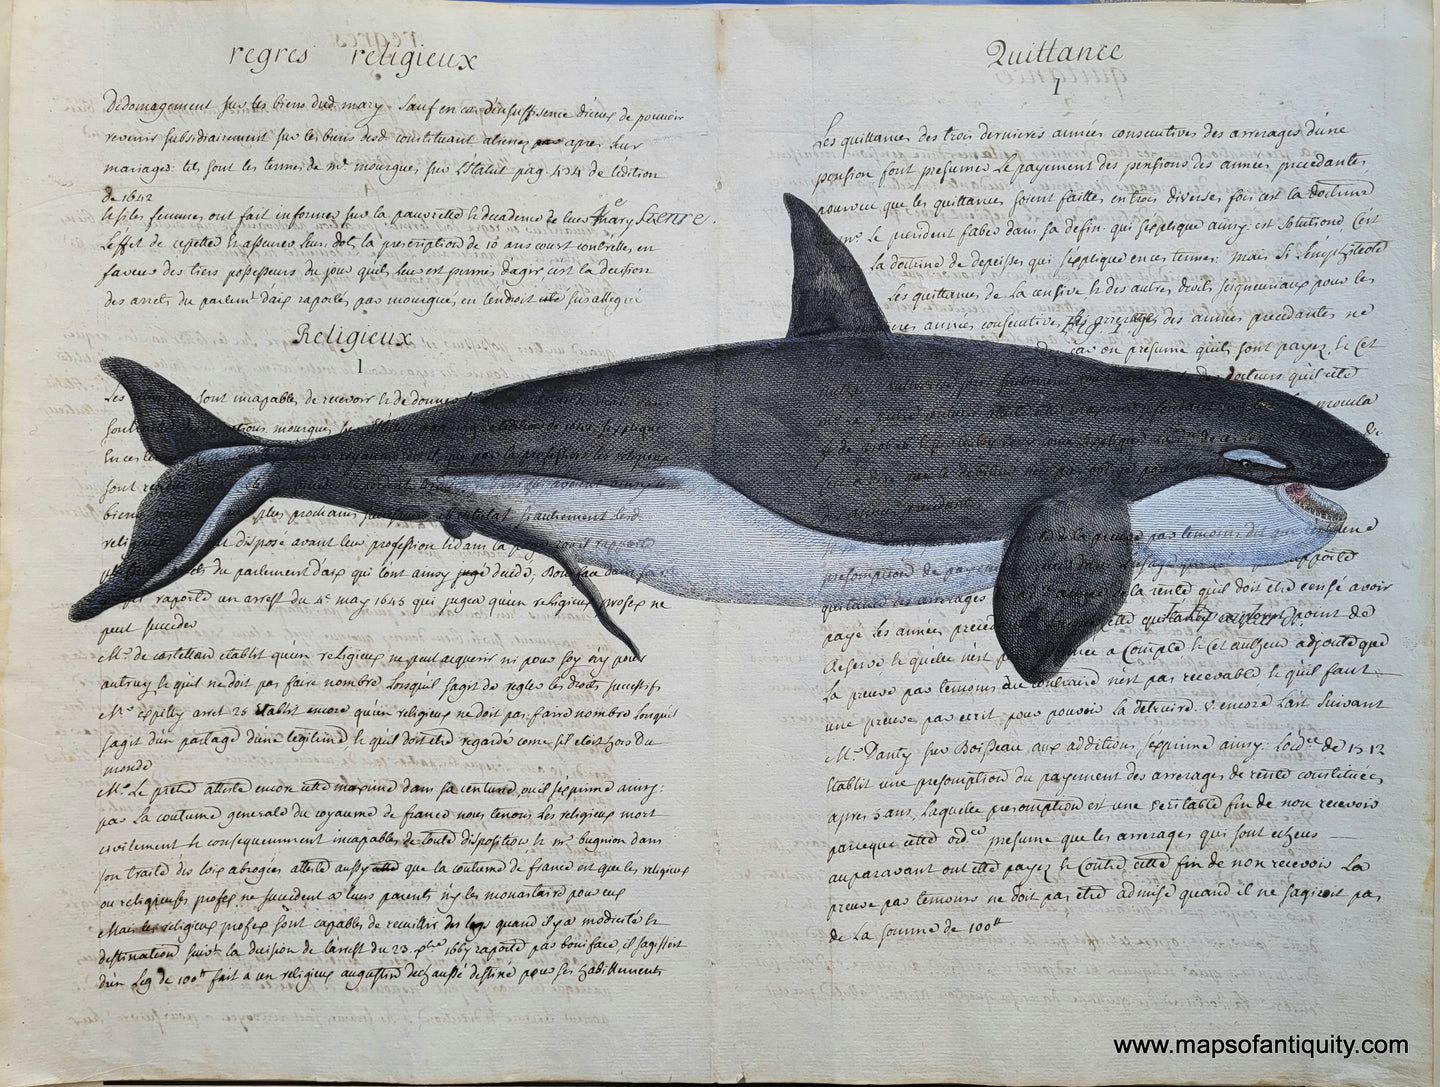 Digitally-Engraved-Specialty-Reproduction-Reproductions-Antique-Natural-History-Print-Prints-Whale-Toothed-Whales-Maps-of-Antiquity